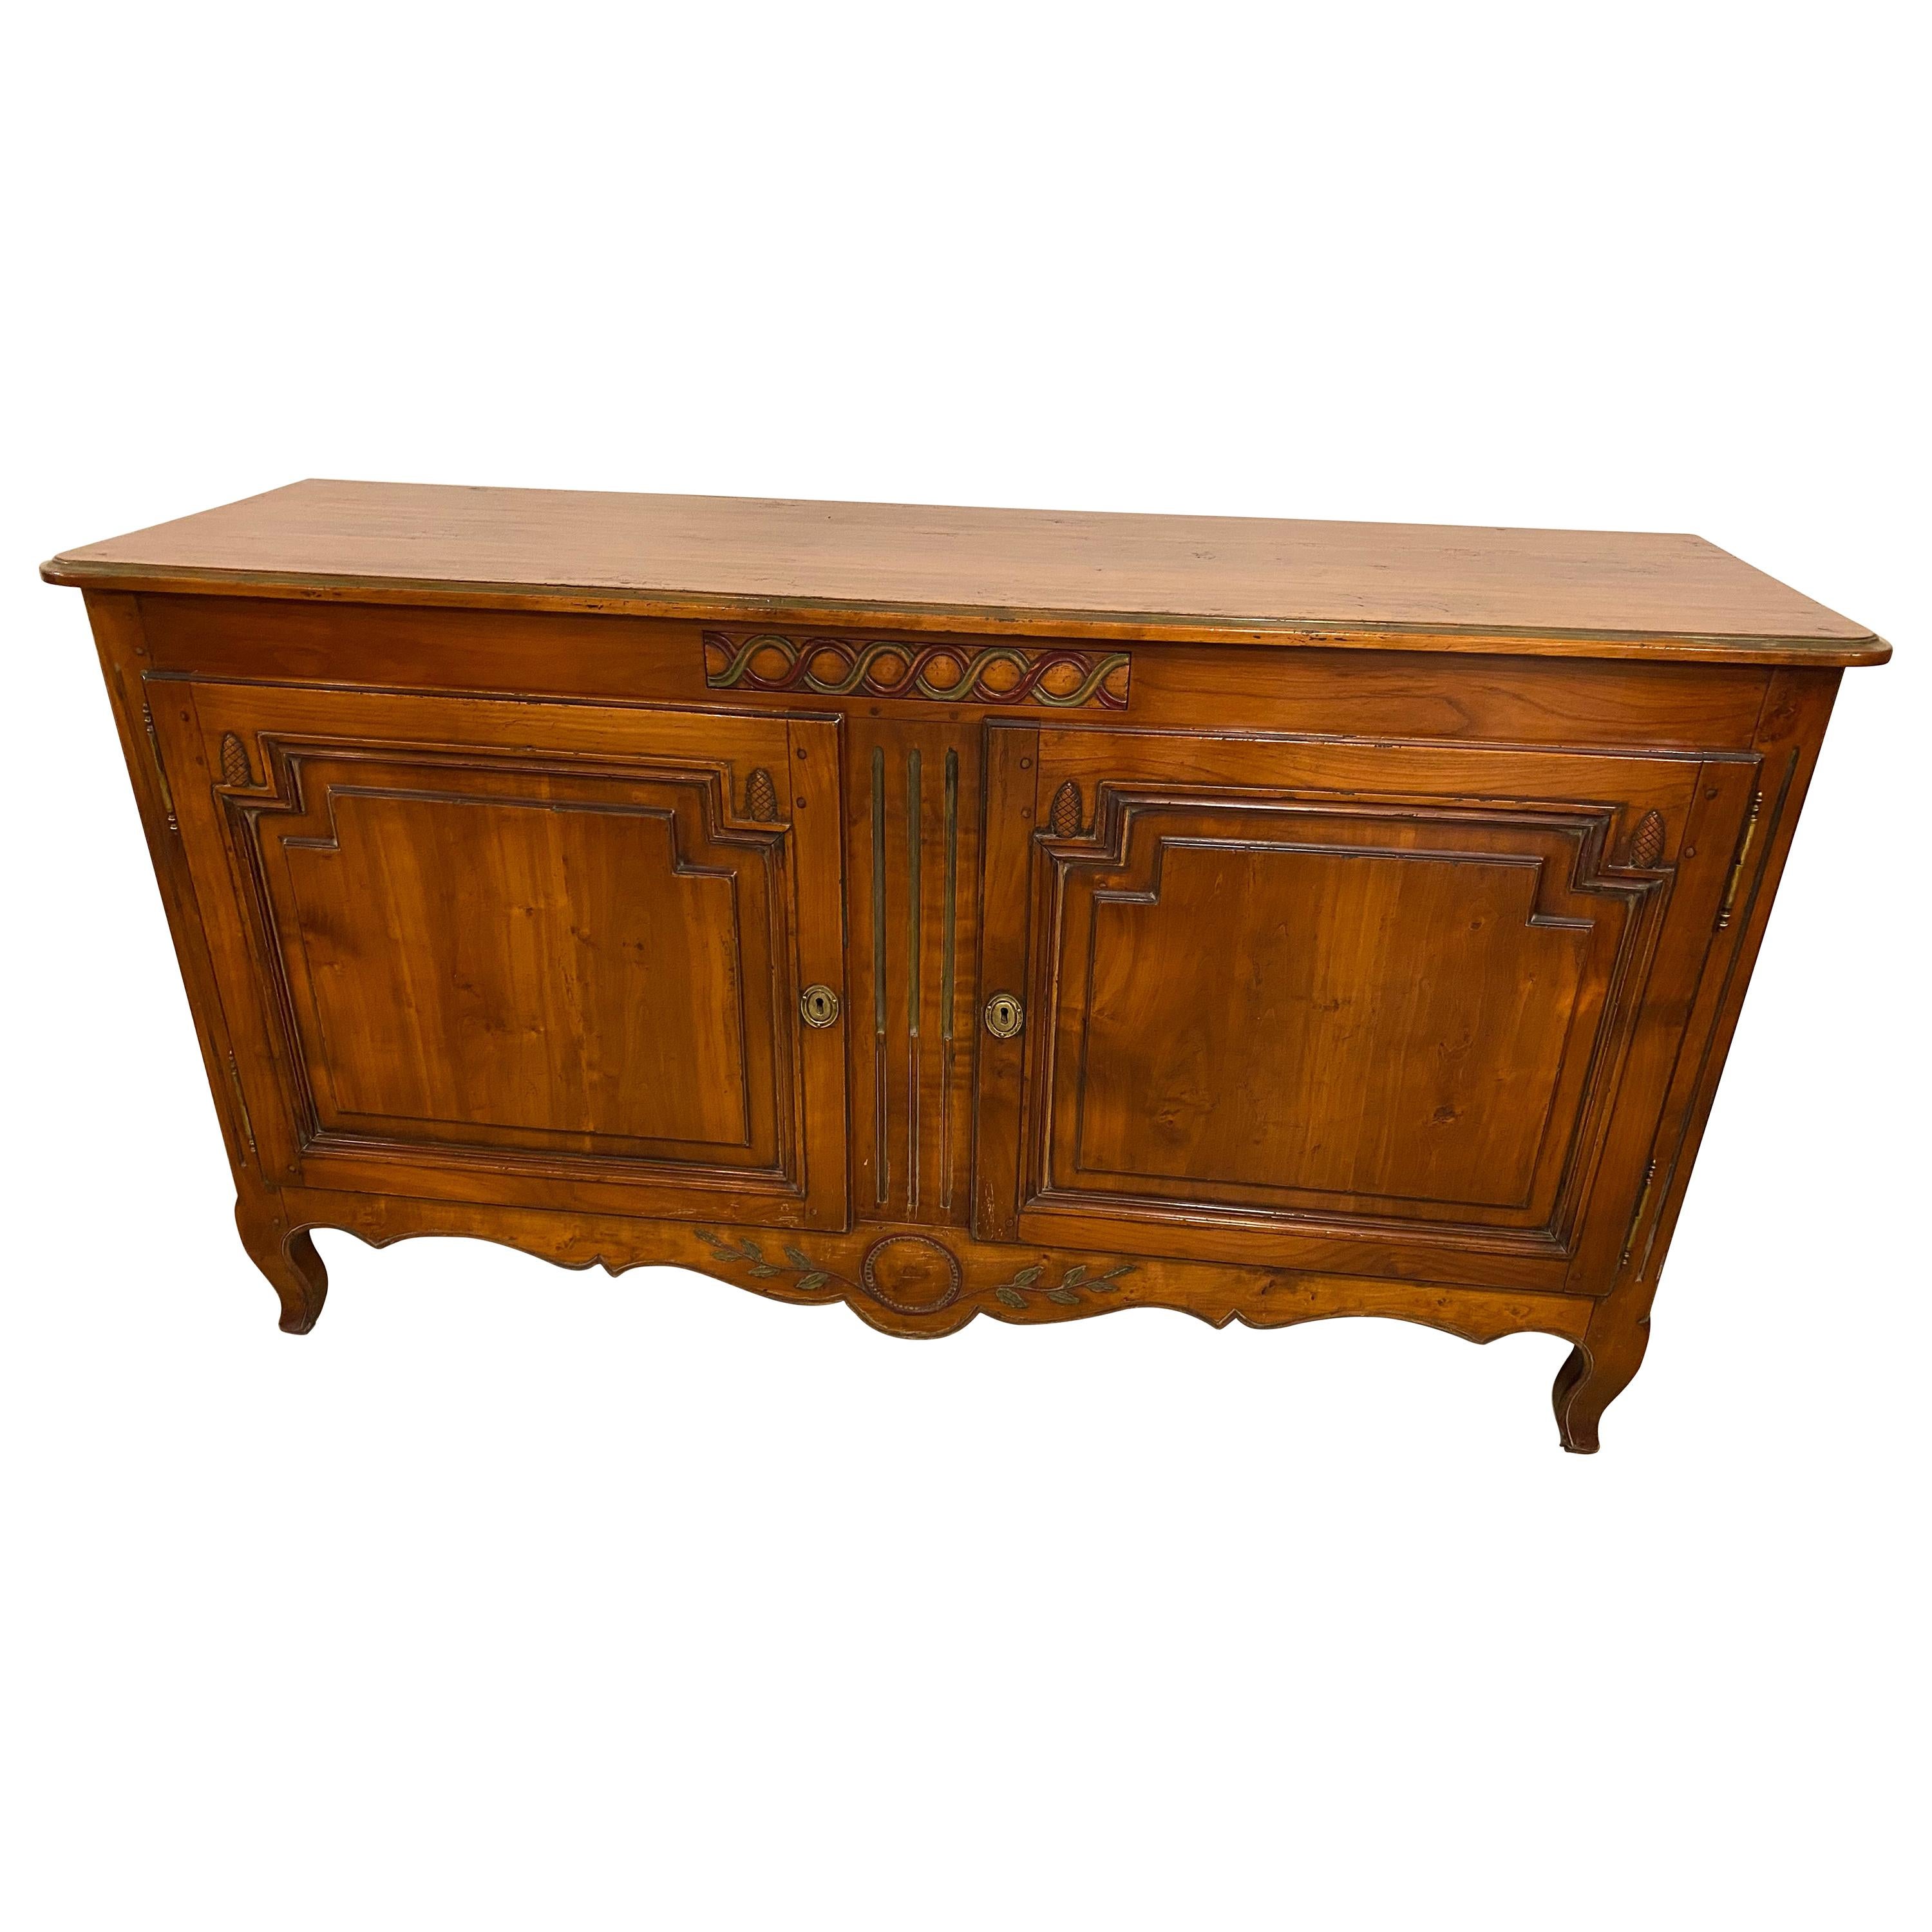 French Country Style Buffet Sideboard, Solid Cherry Sideboard, Carved Detail